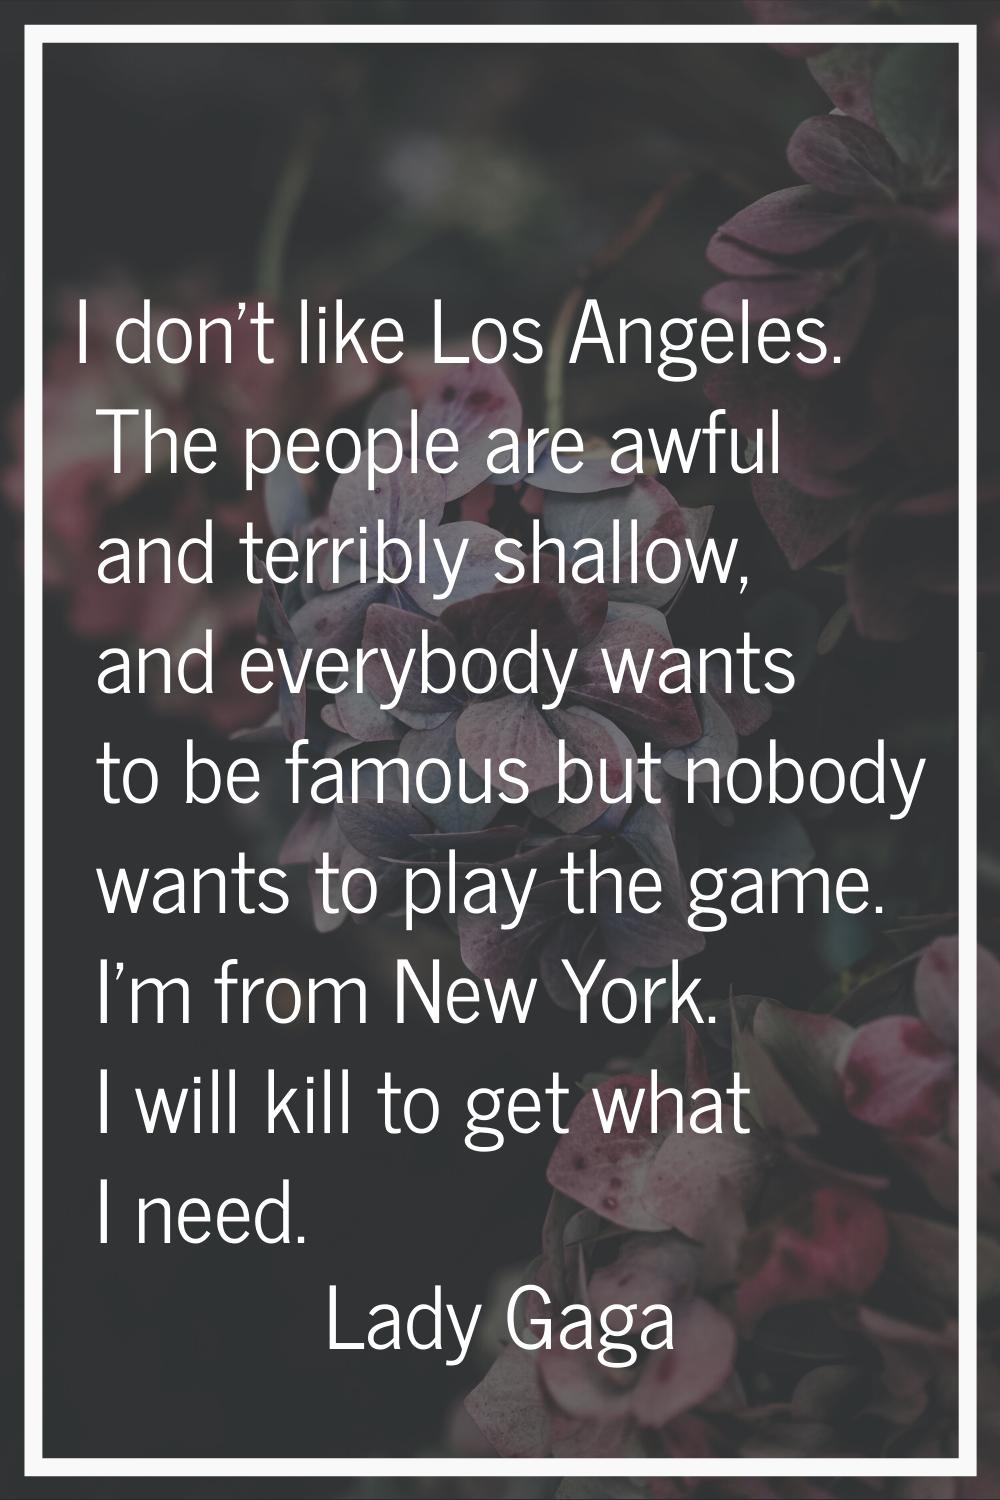 I don't like Los Angeles. The people are awful and terribly shallow, and everybody wants to be famo